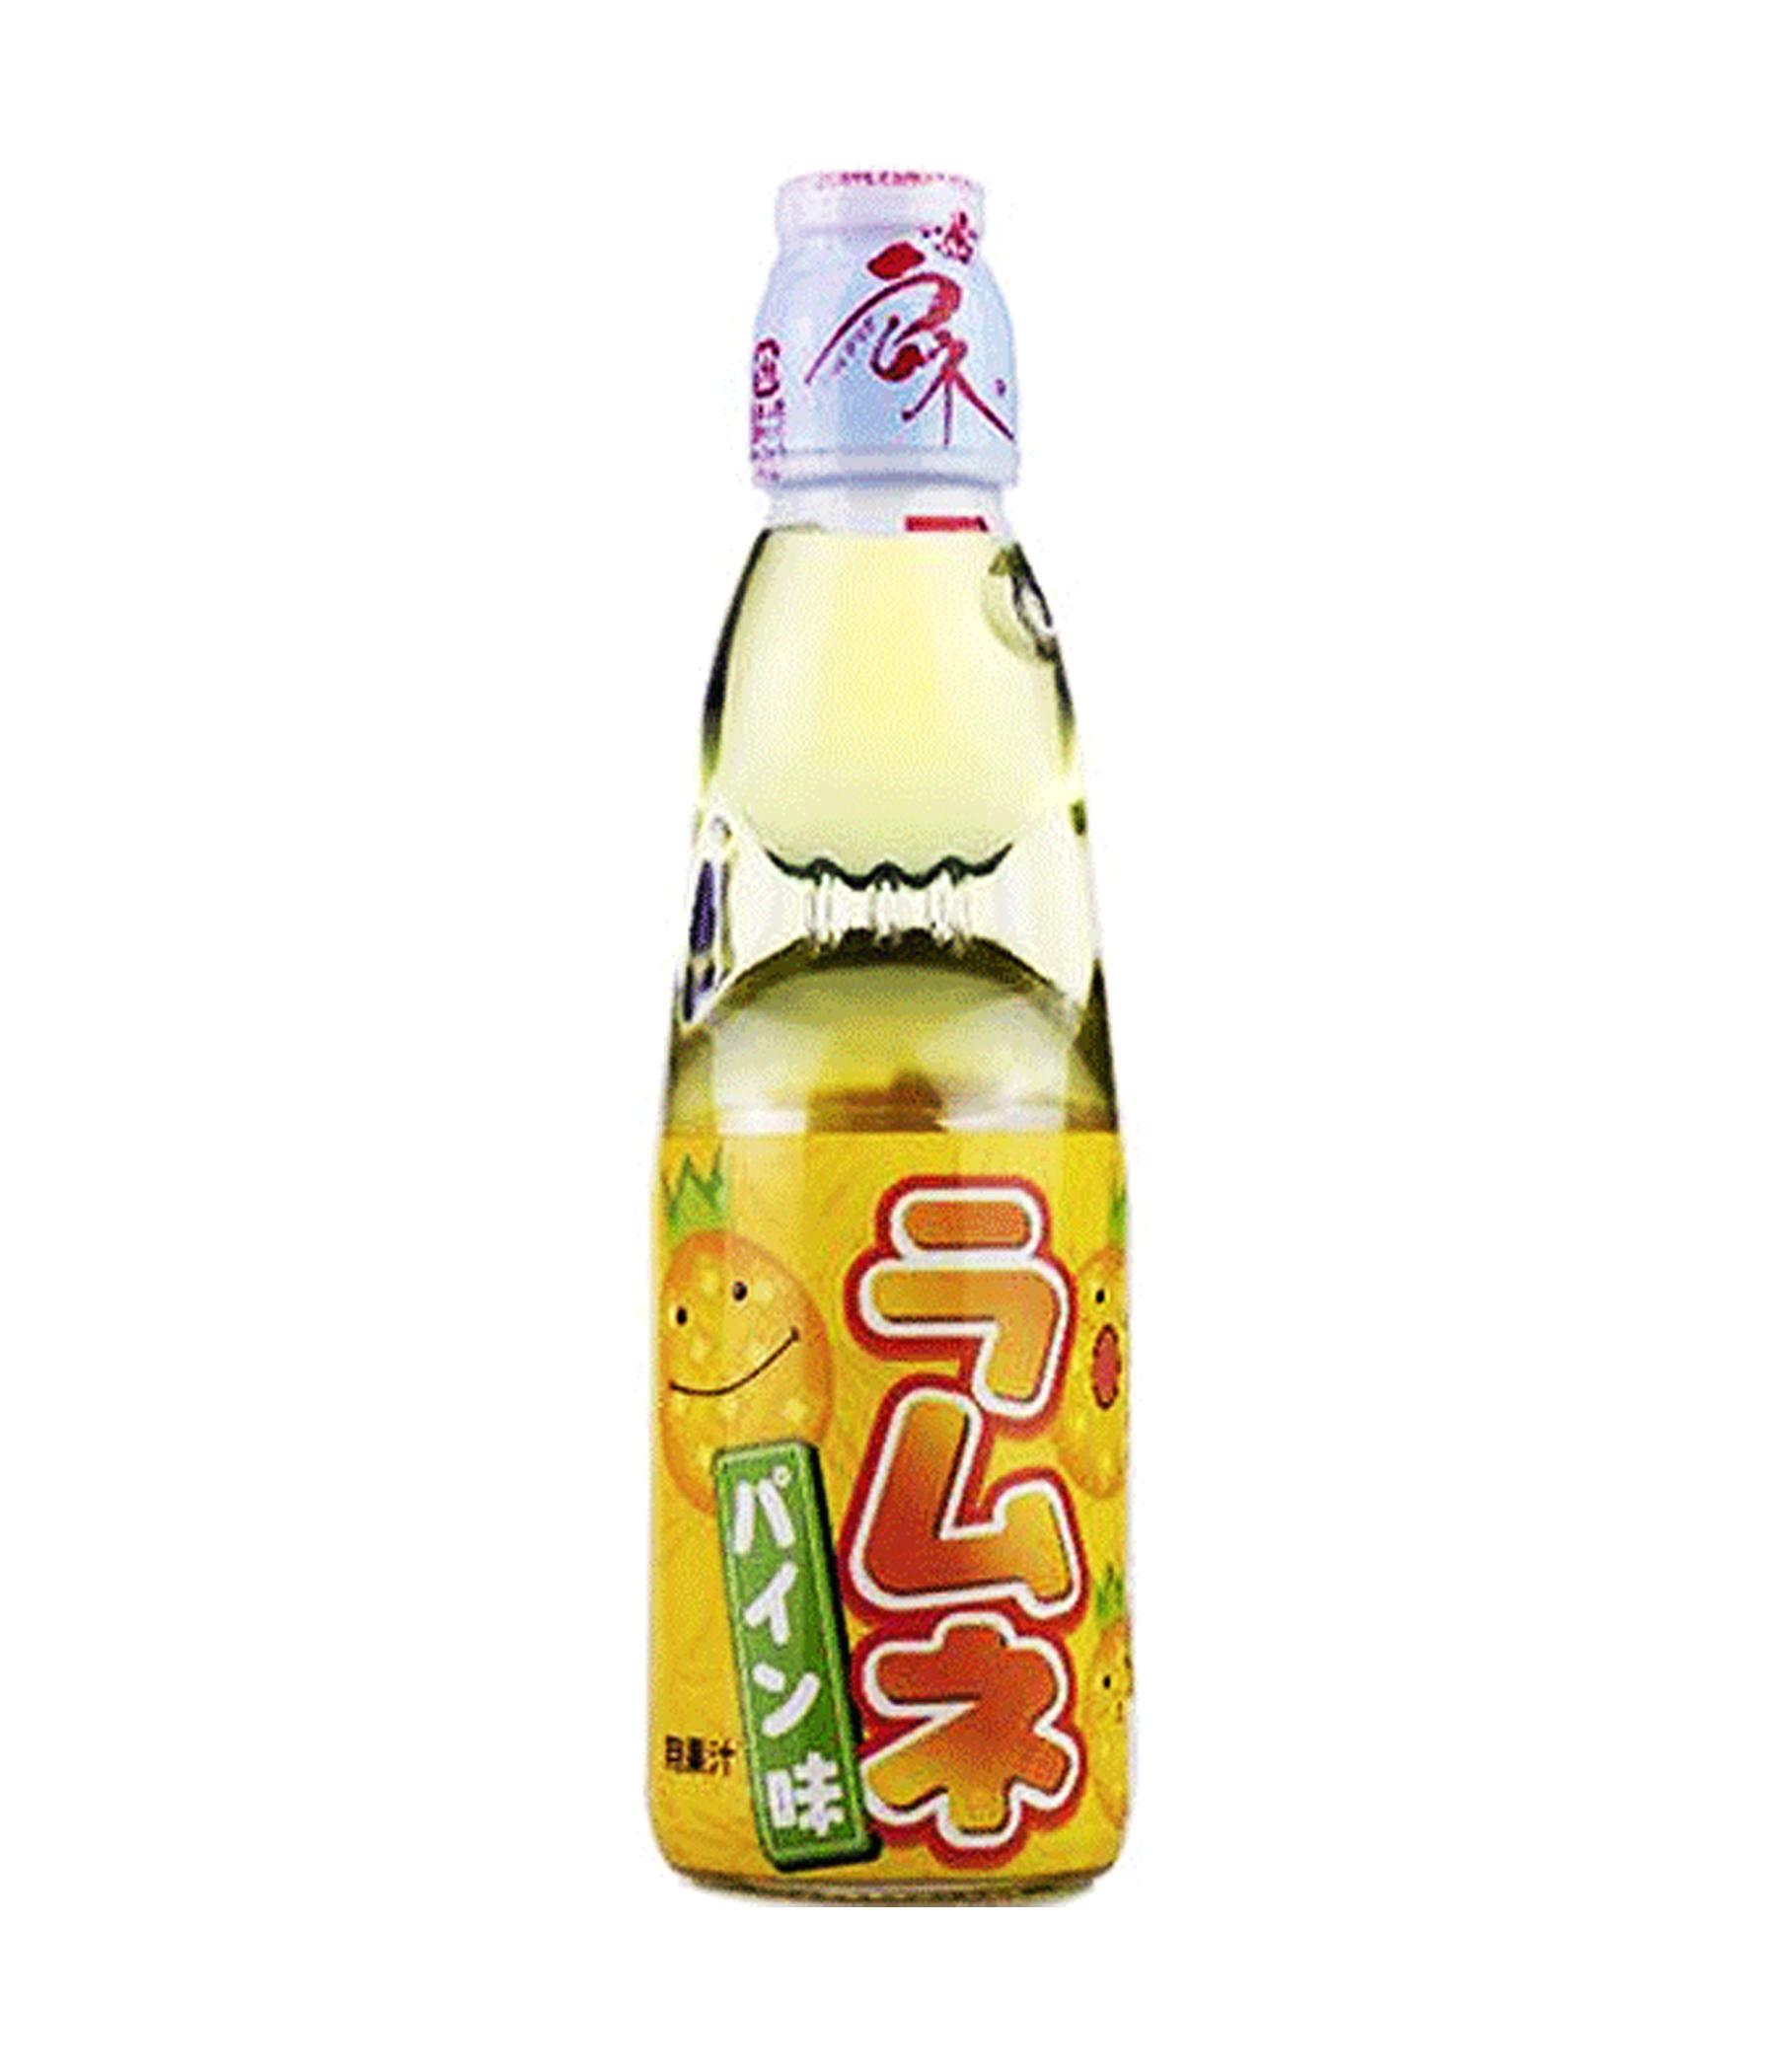 hata-japanese-soda-carbonate-soft-drink-pineapple-flavour